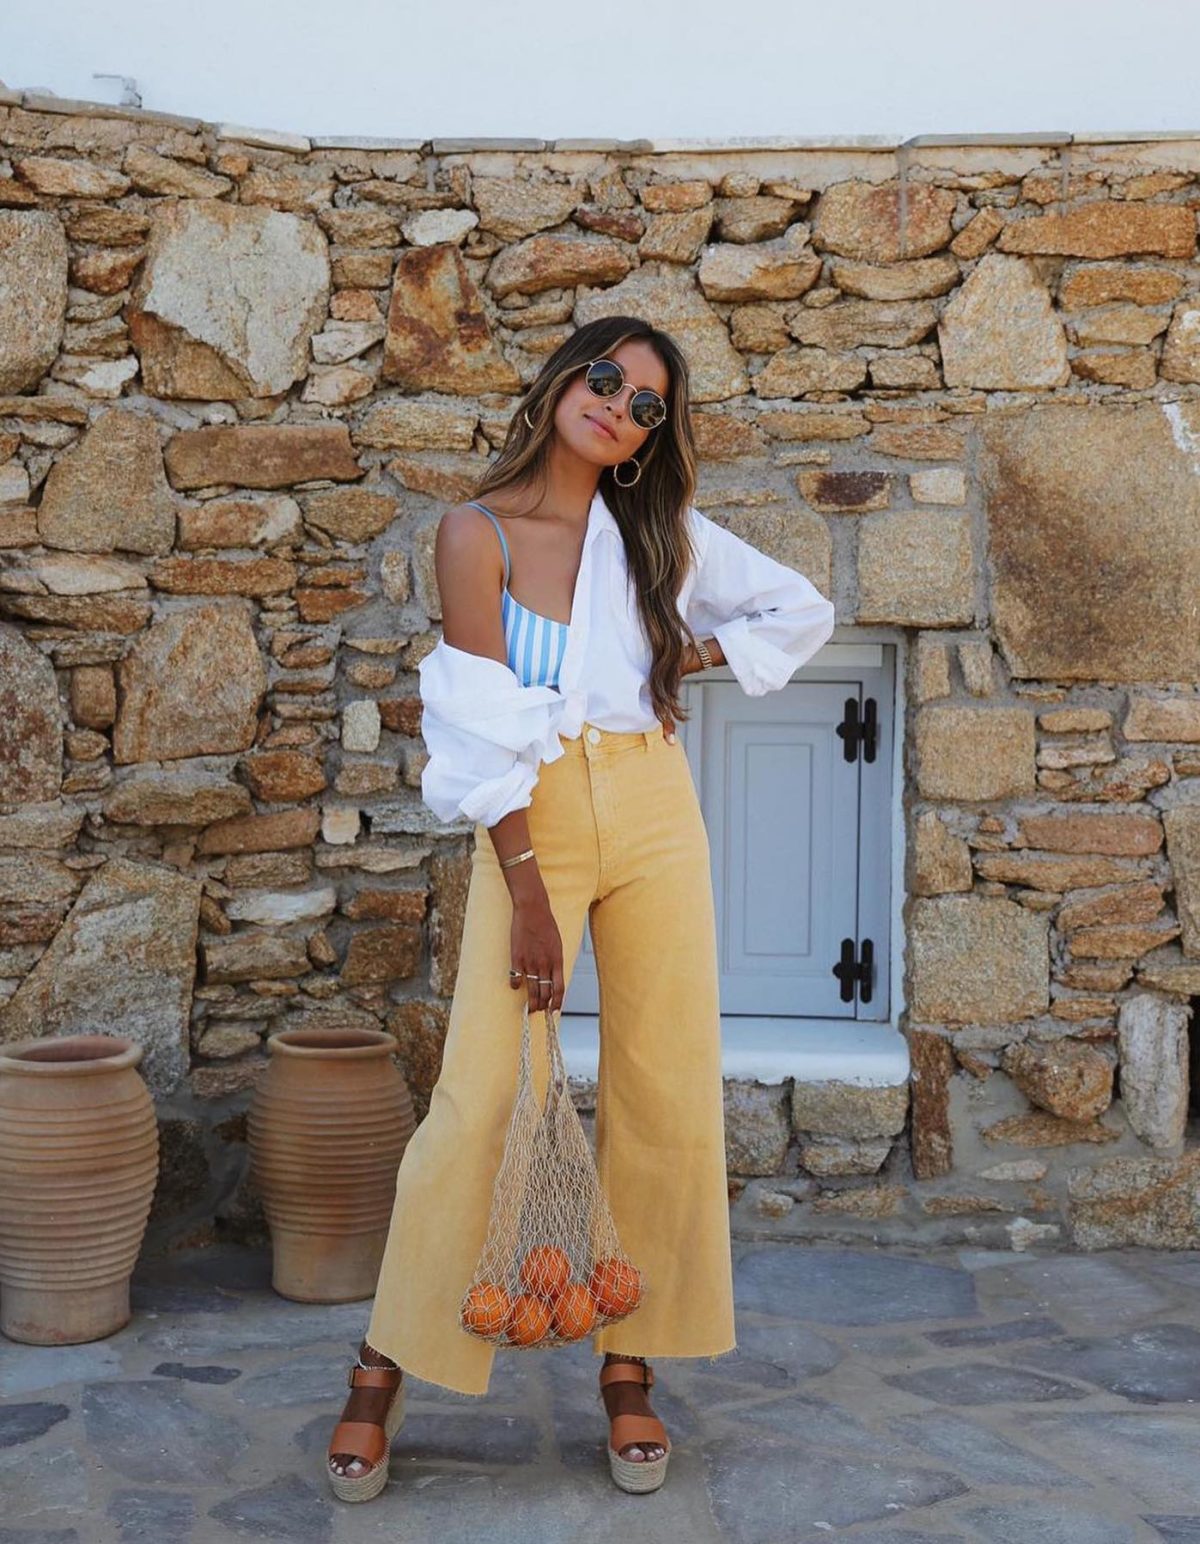 Colorful summer outfit with yellow culottes, orange wedges and a white button-up shirt.